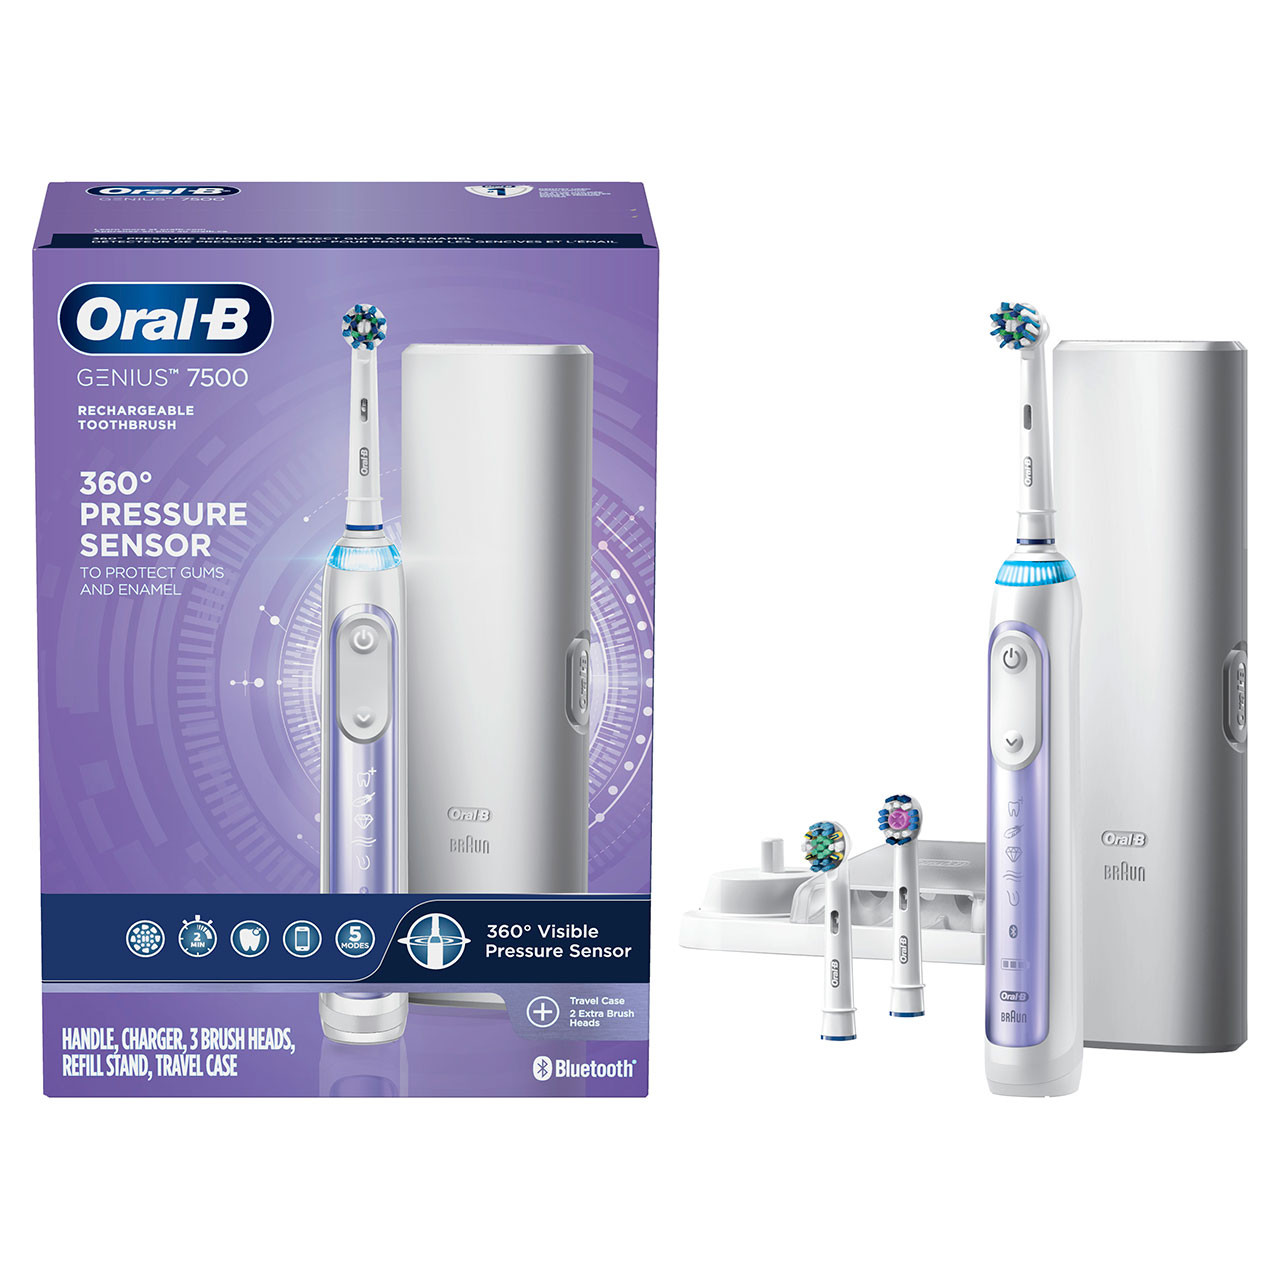 Genius 7500 Rechargeable Electric Toothbrush, Orchid Purple